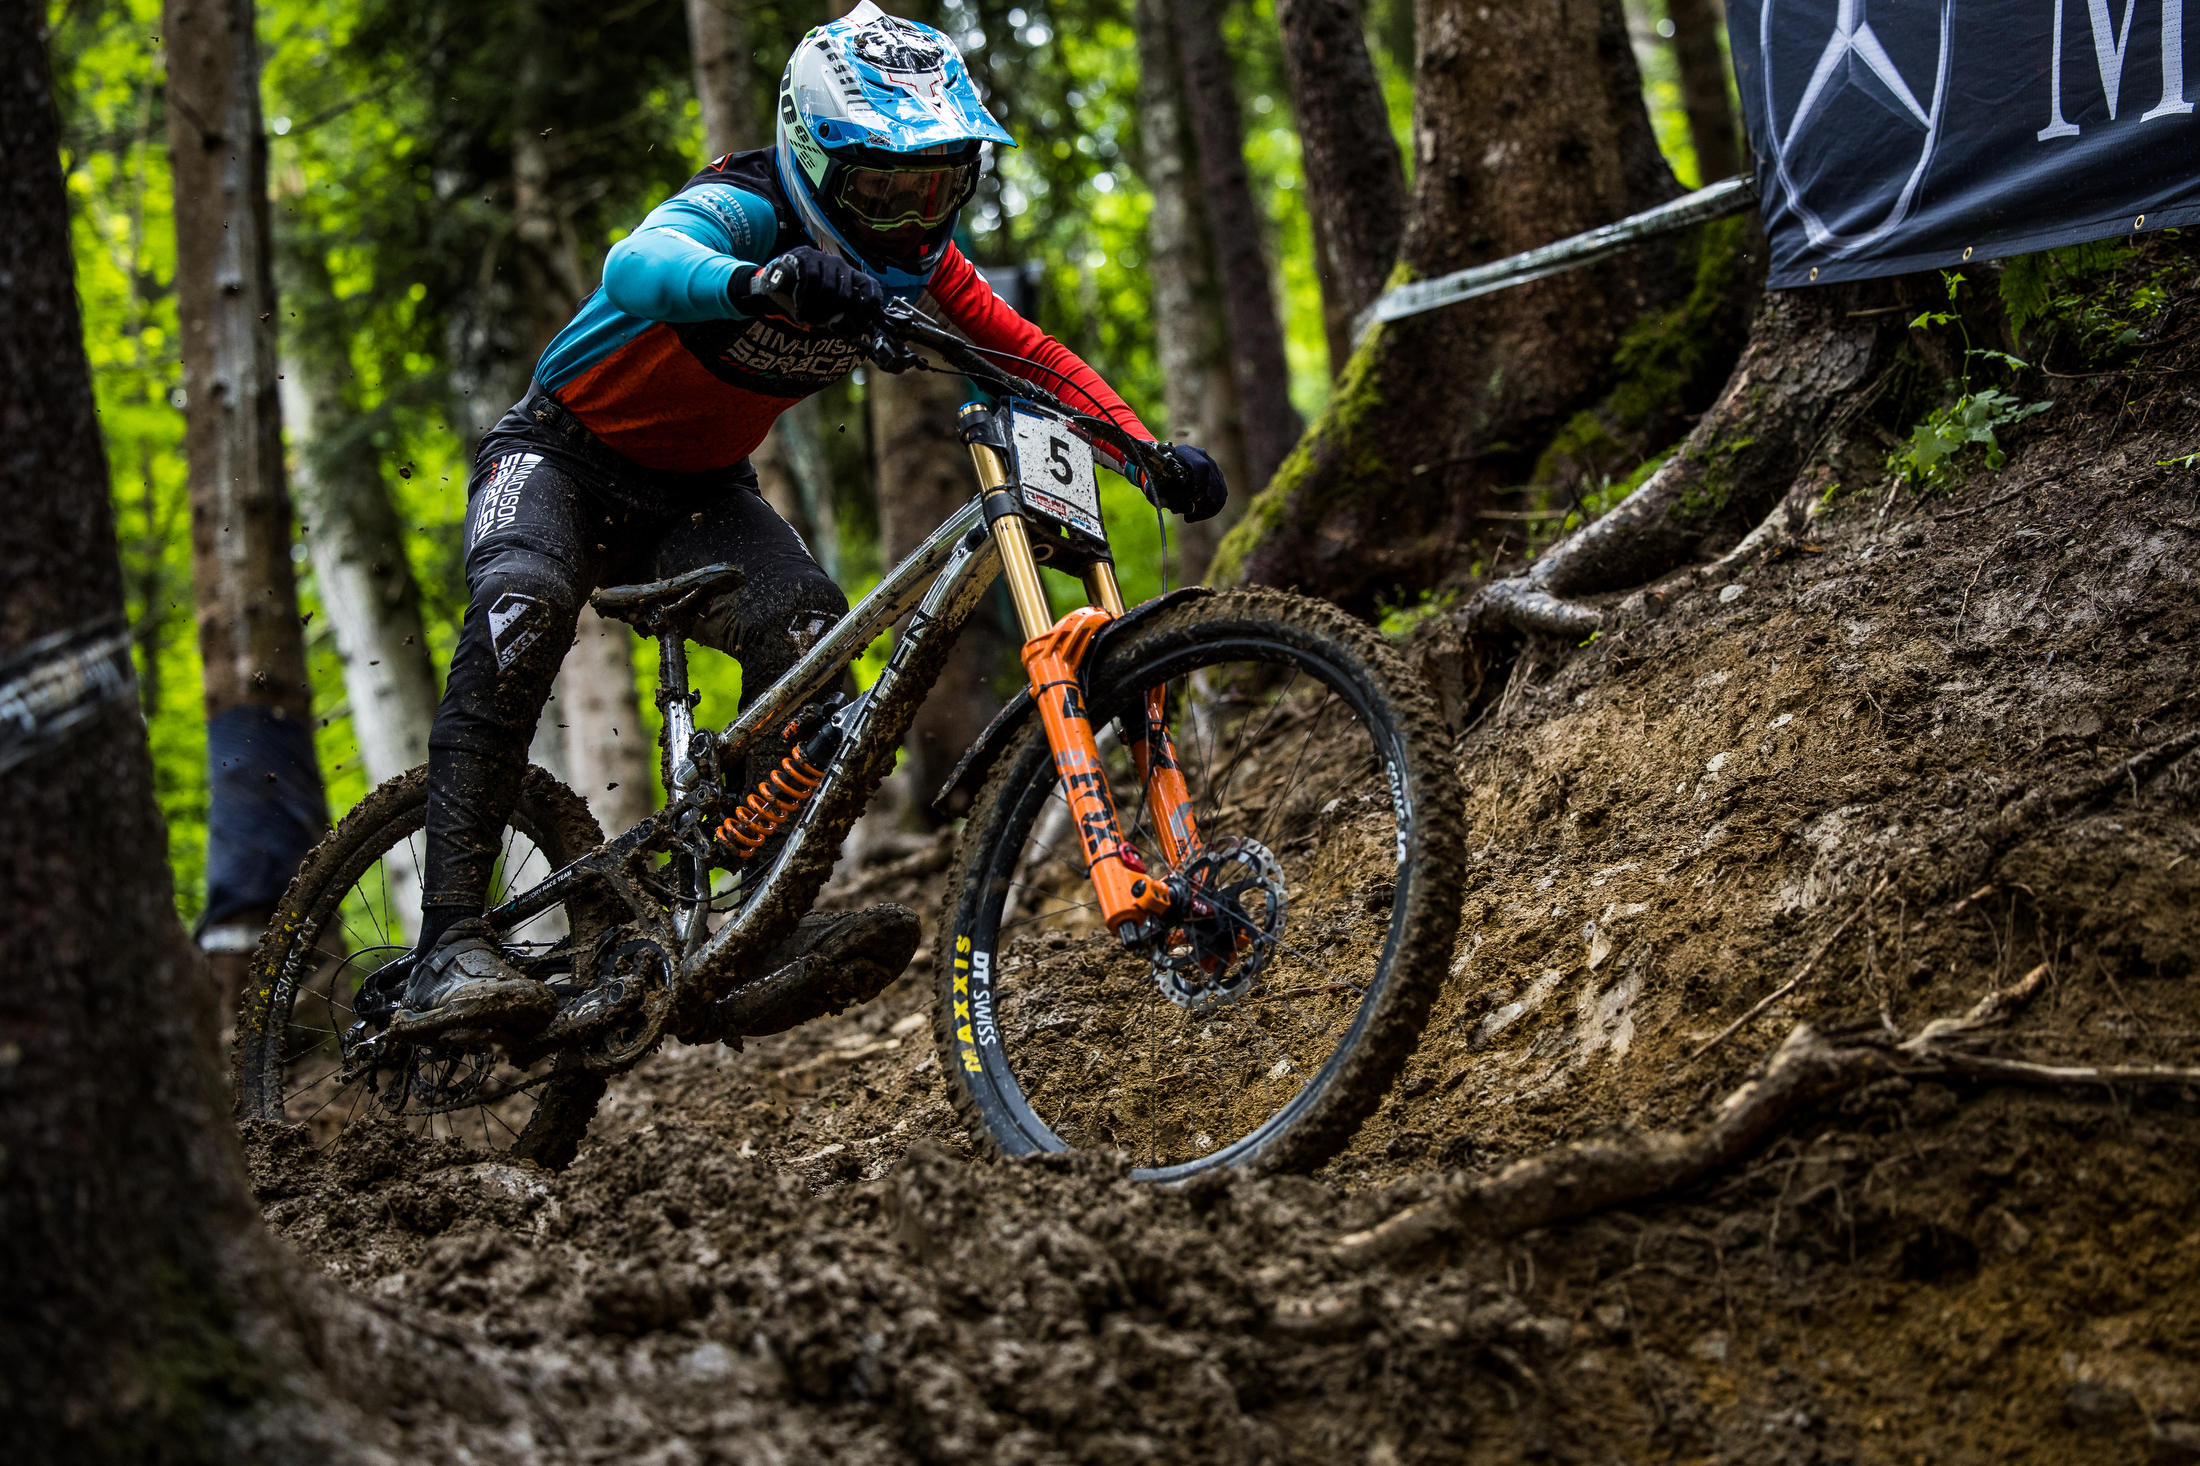 Matt Walker getting his first World Cup win on a muddy Leogang course